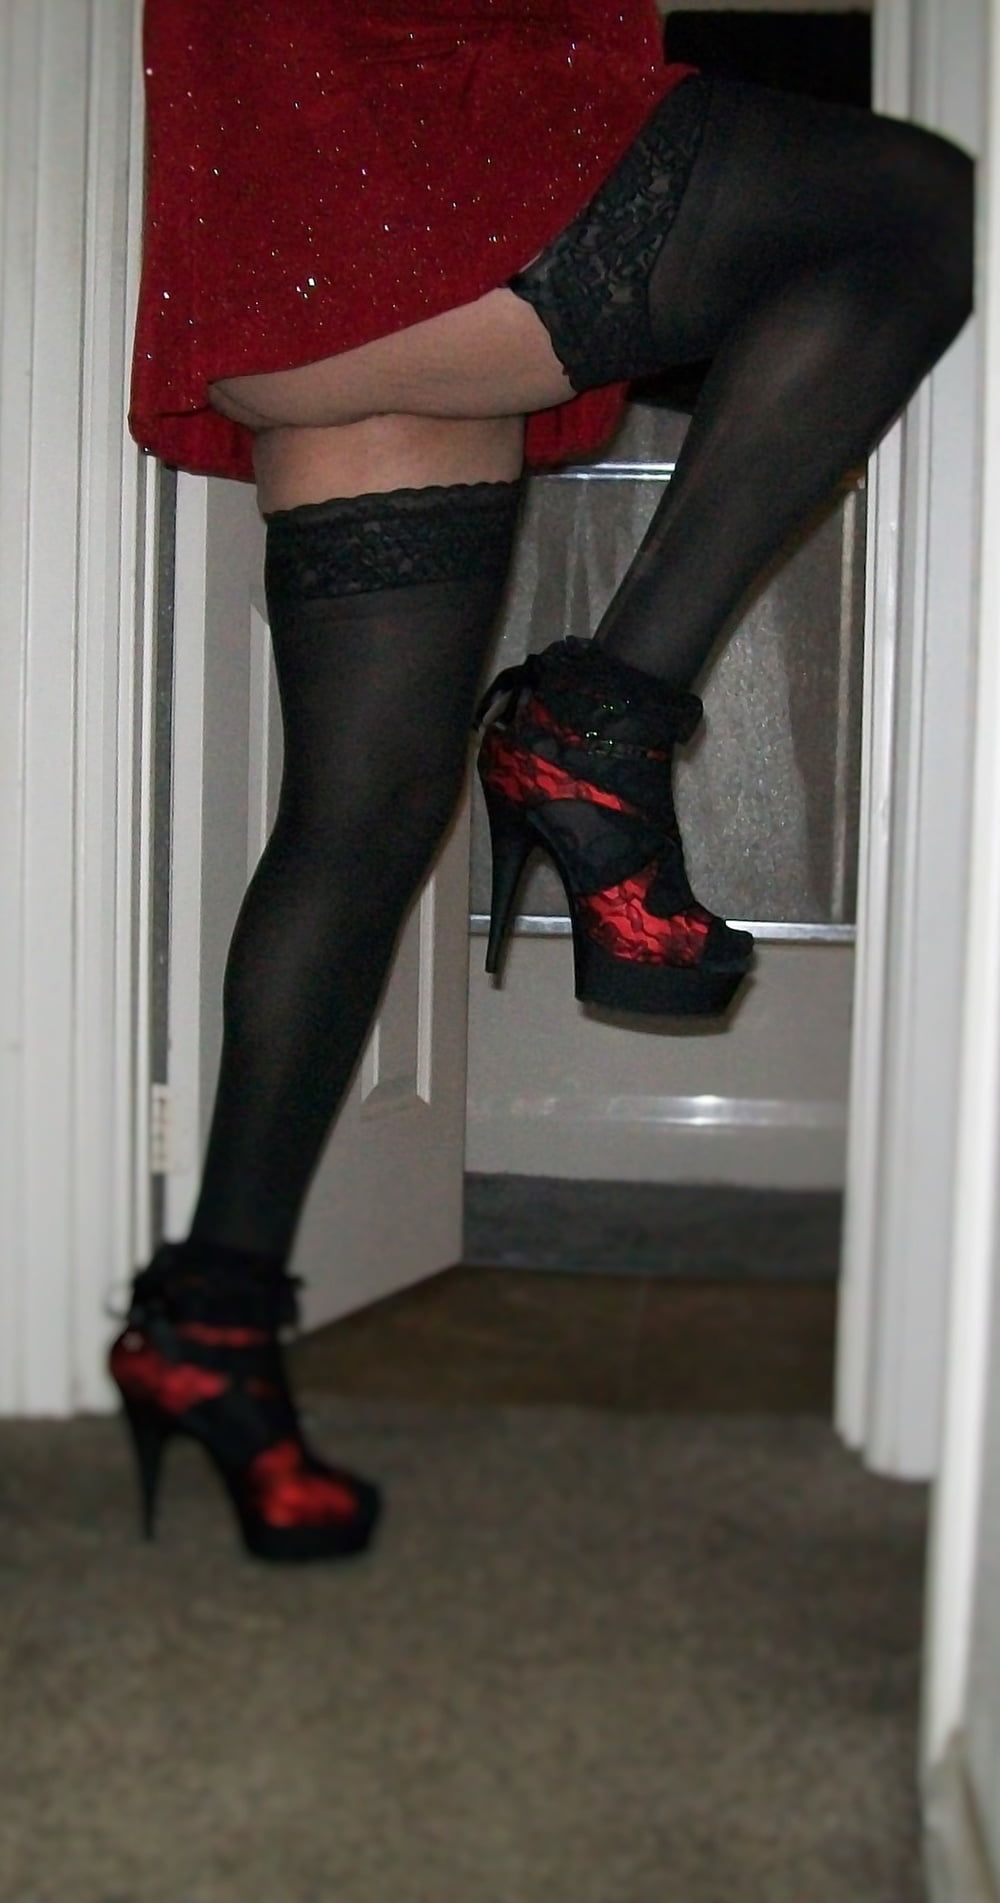 Me and my sexy new heels #2